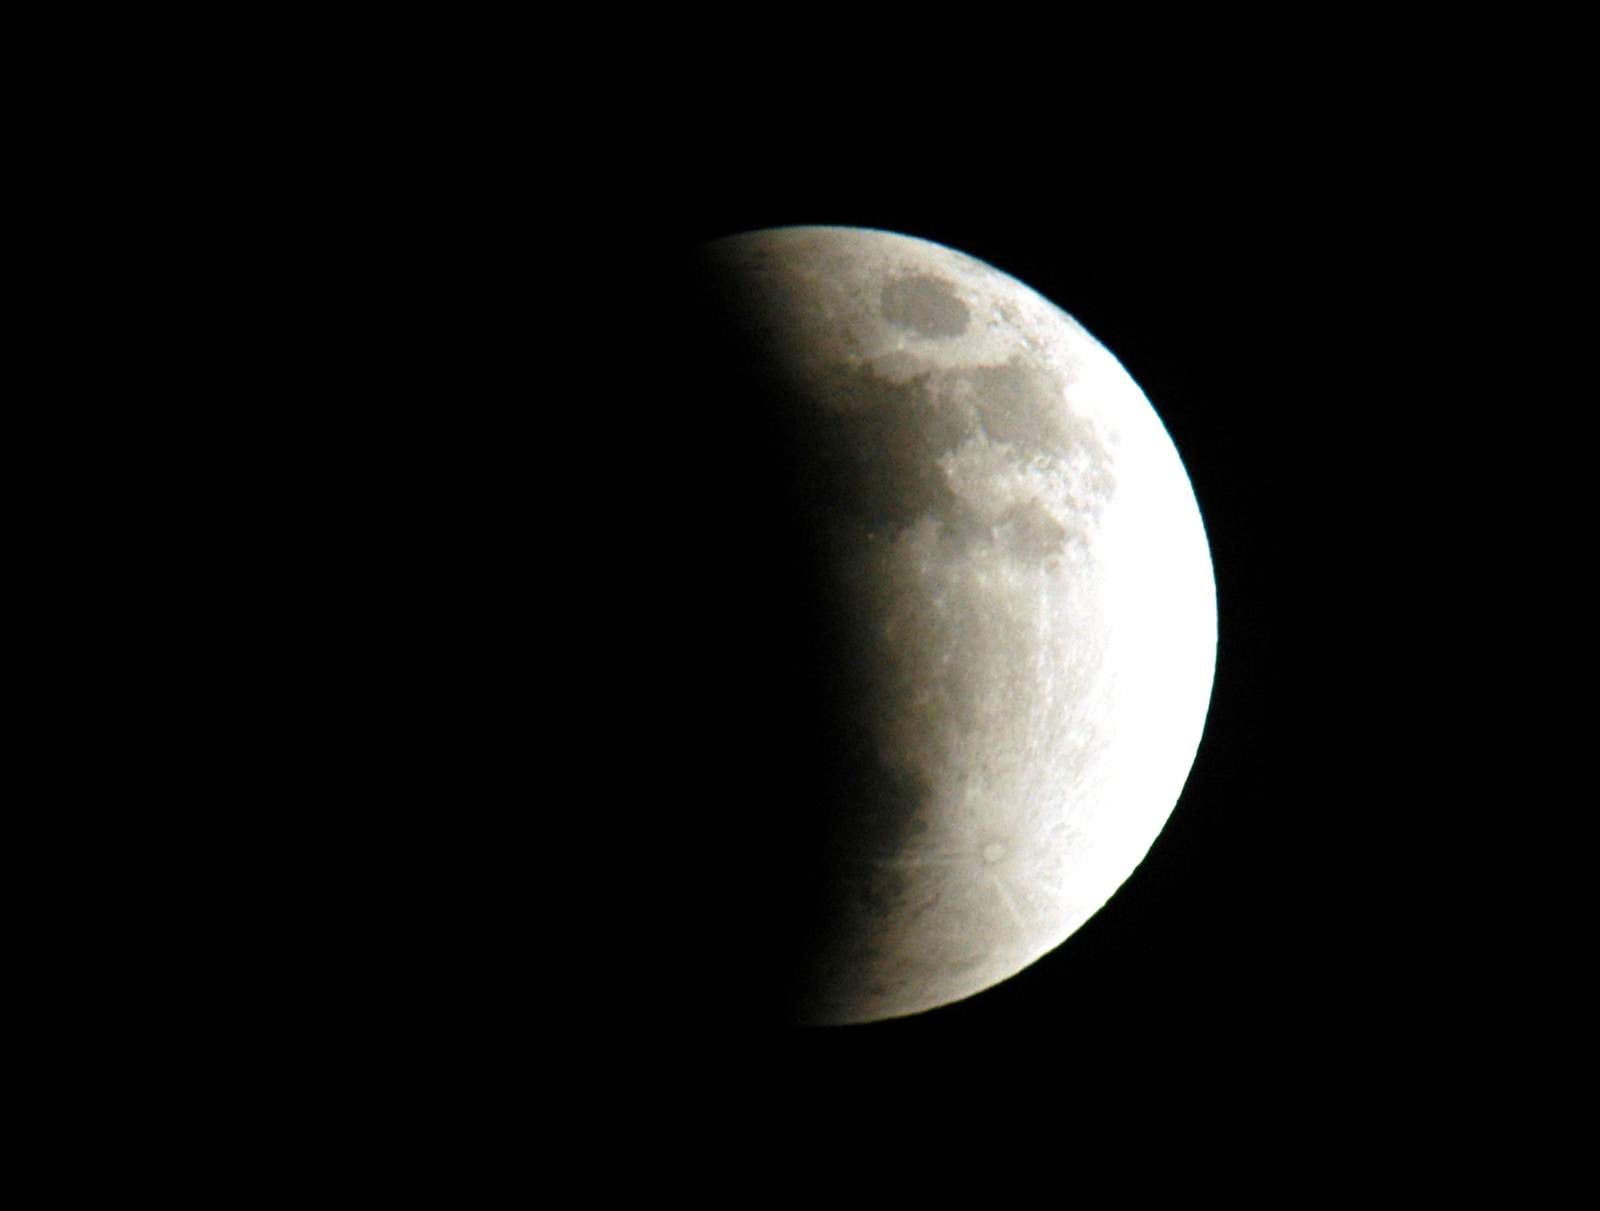 How to watch the Independance Day lunar eclipse